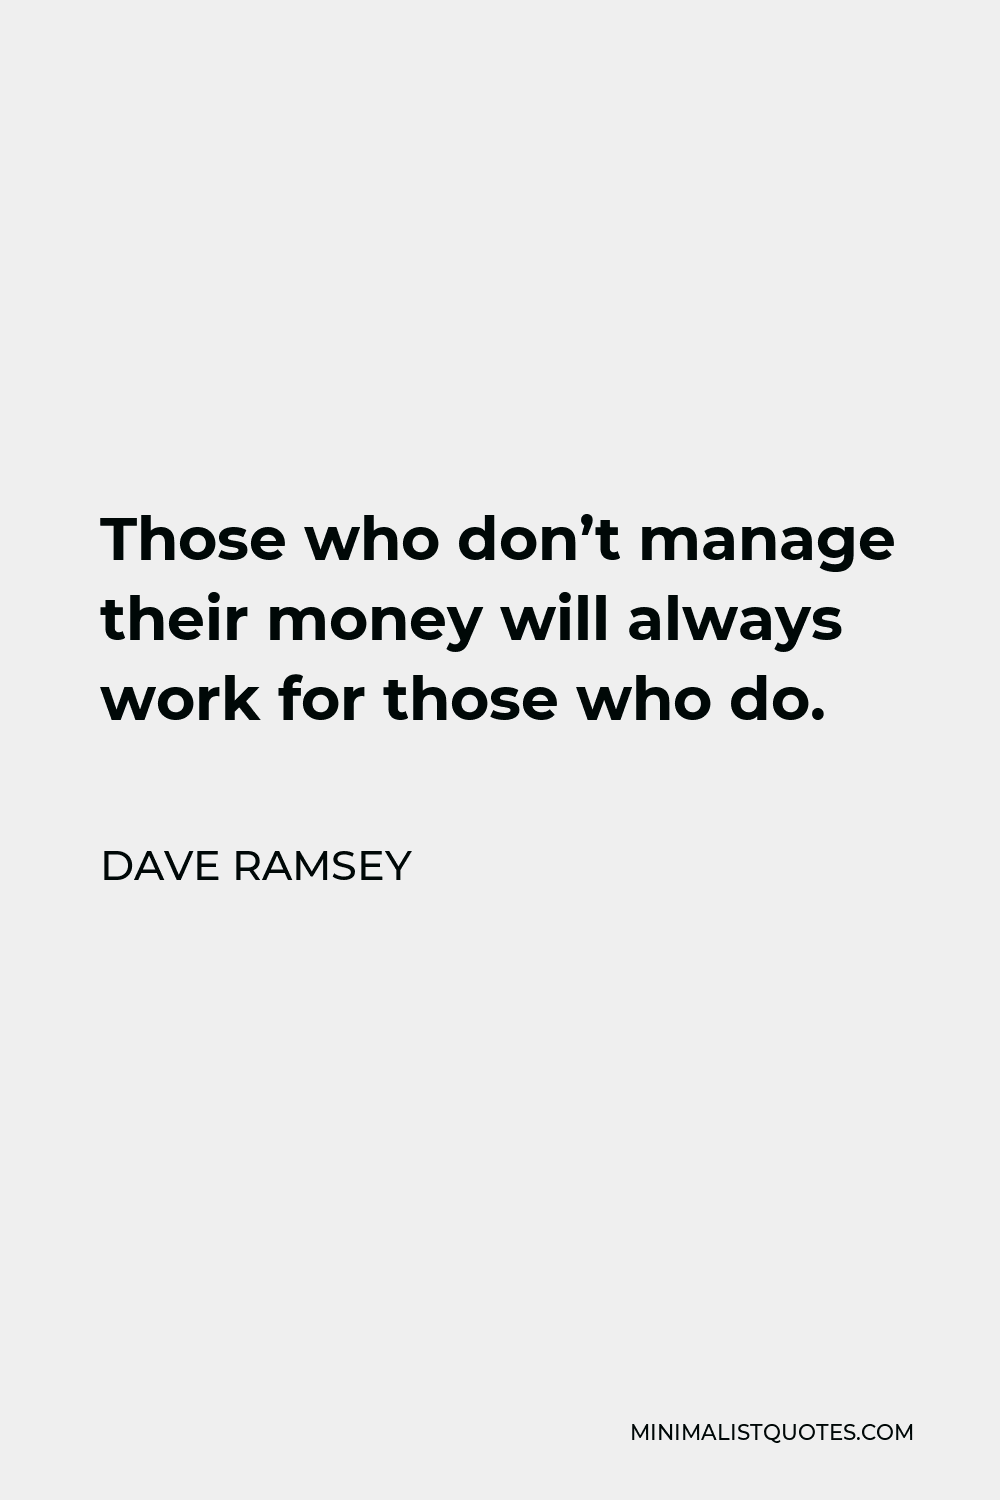 Dave Ramsey Quote - Those who don’t manage their money will always work for those who do.